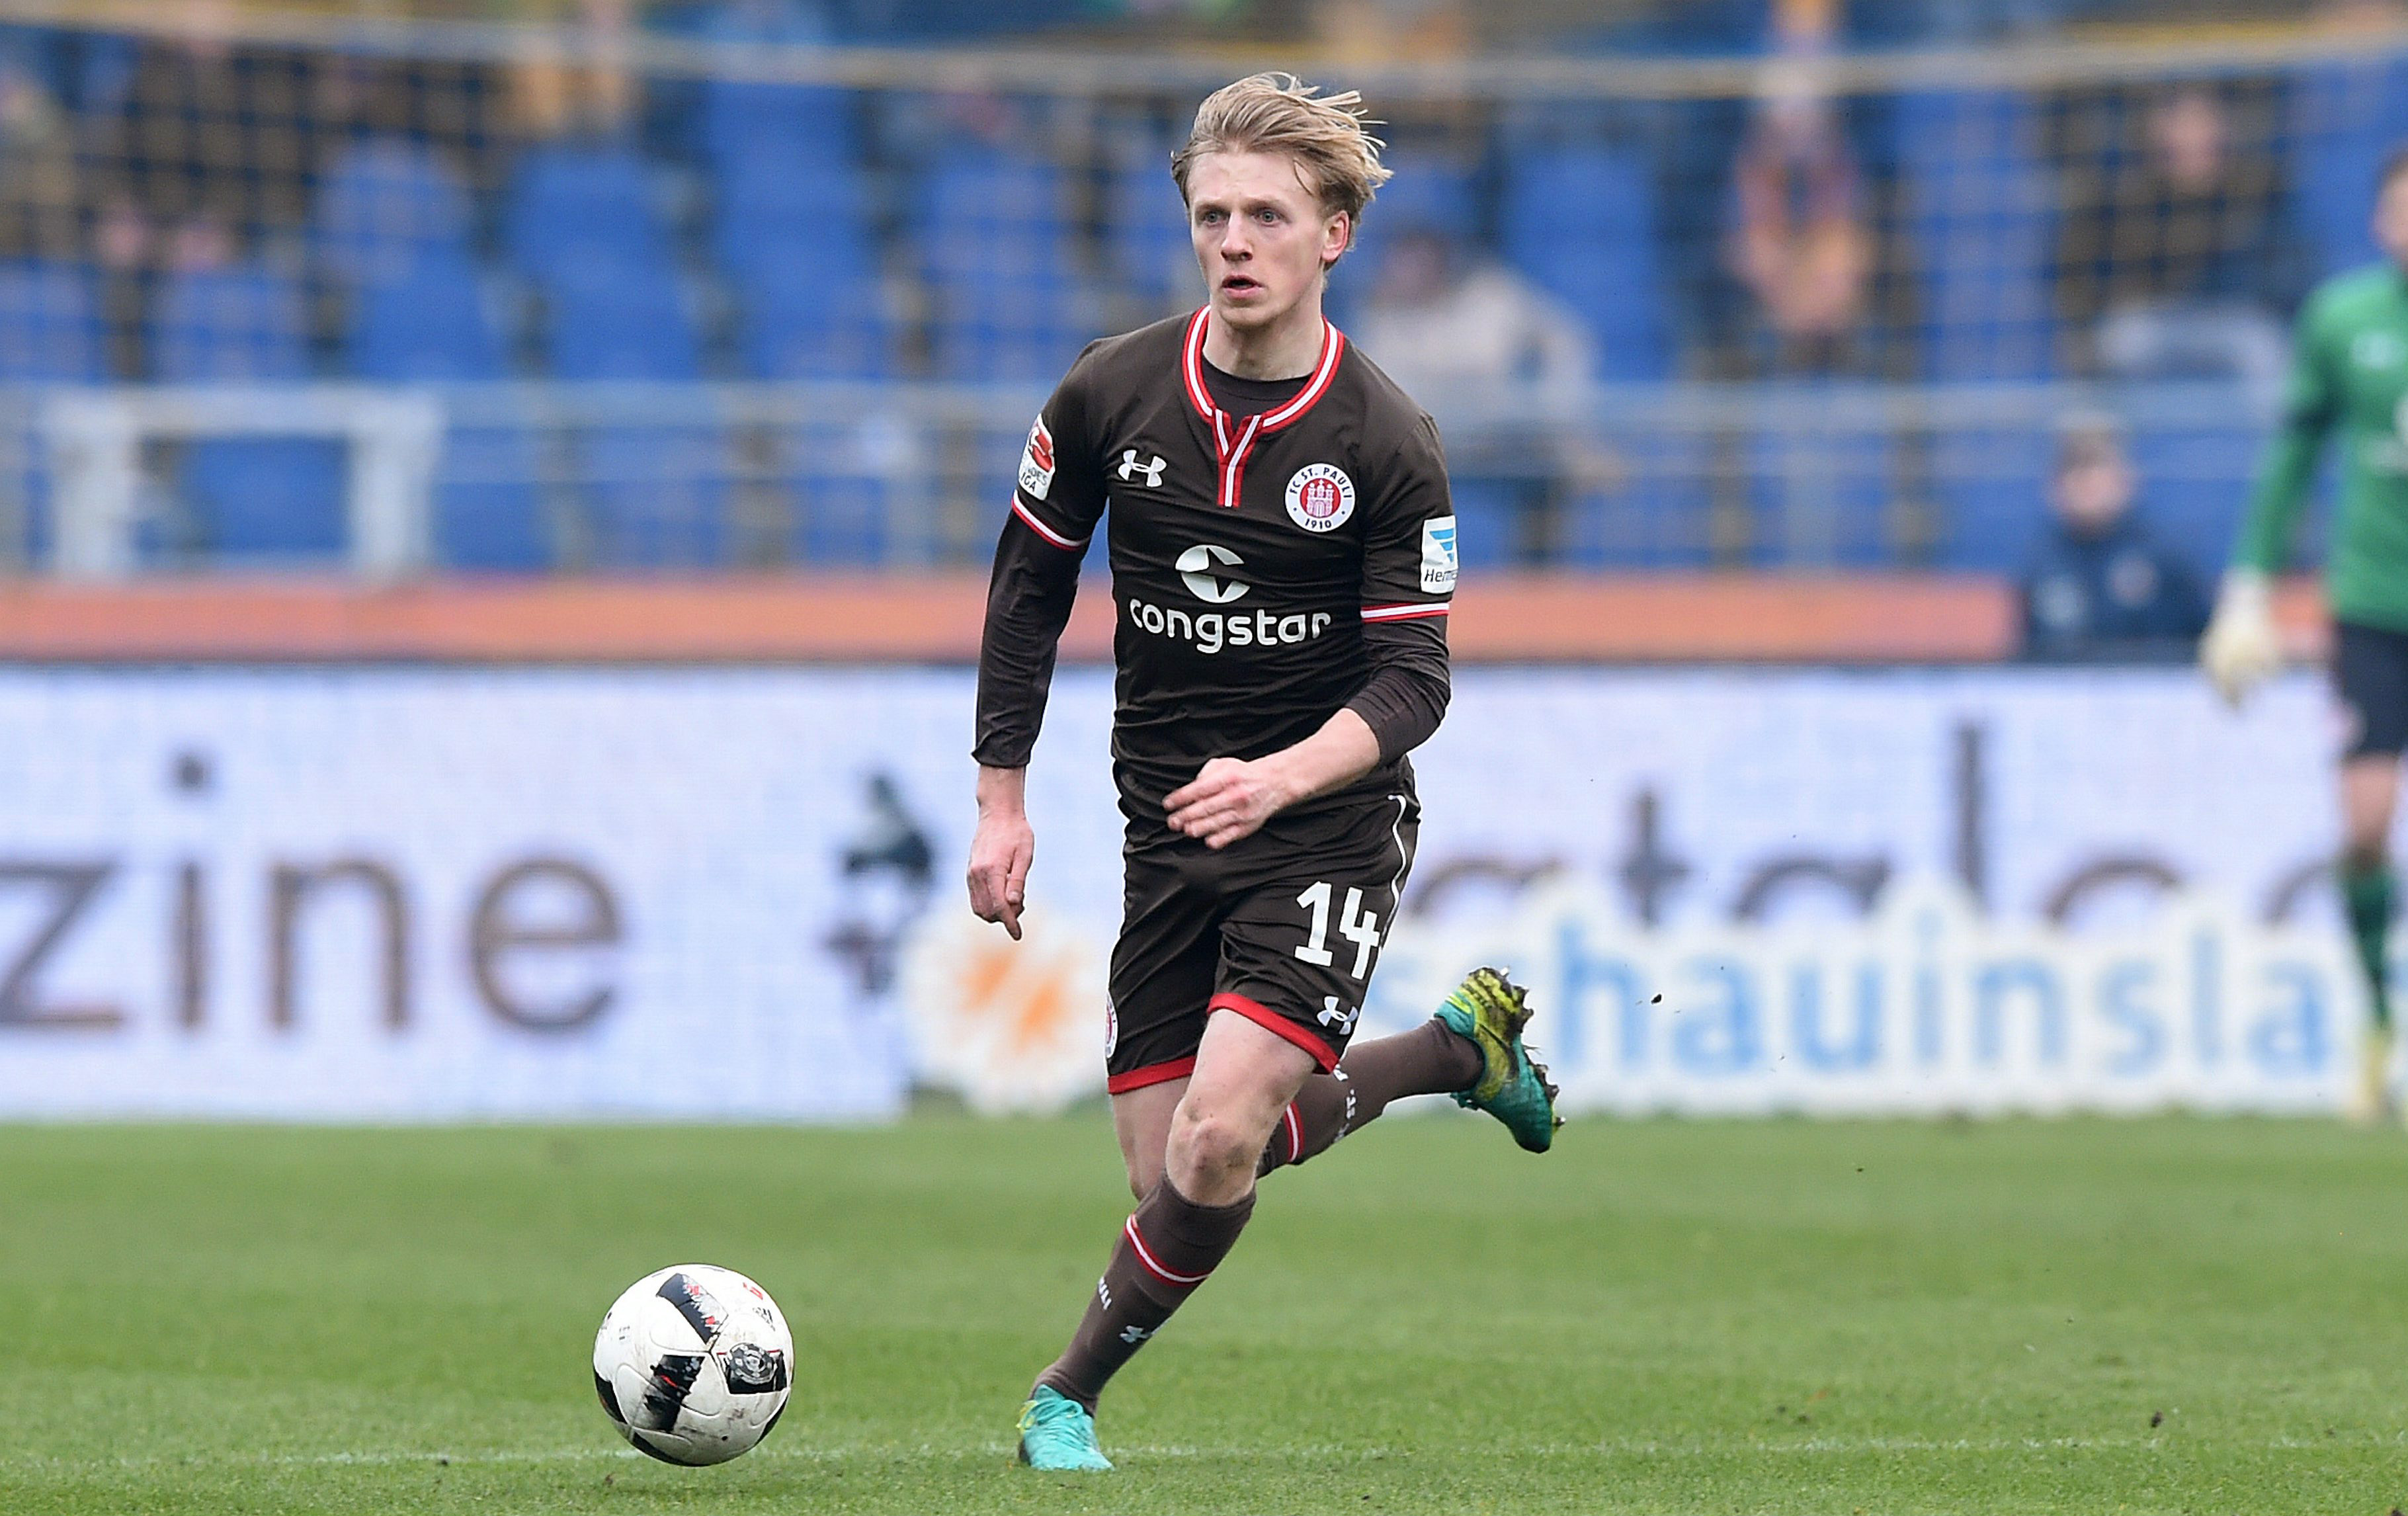 After joining the club on loan from SC Freiburg midfielder Mats Møller Dæhli made 13 appearances in the second half of the season, providing ample evidence not only of his footballing skills but also his running ability.